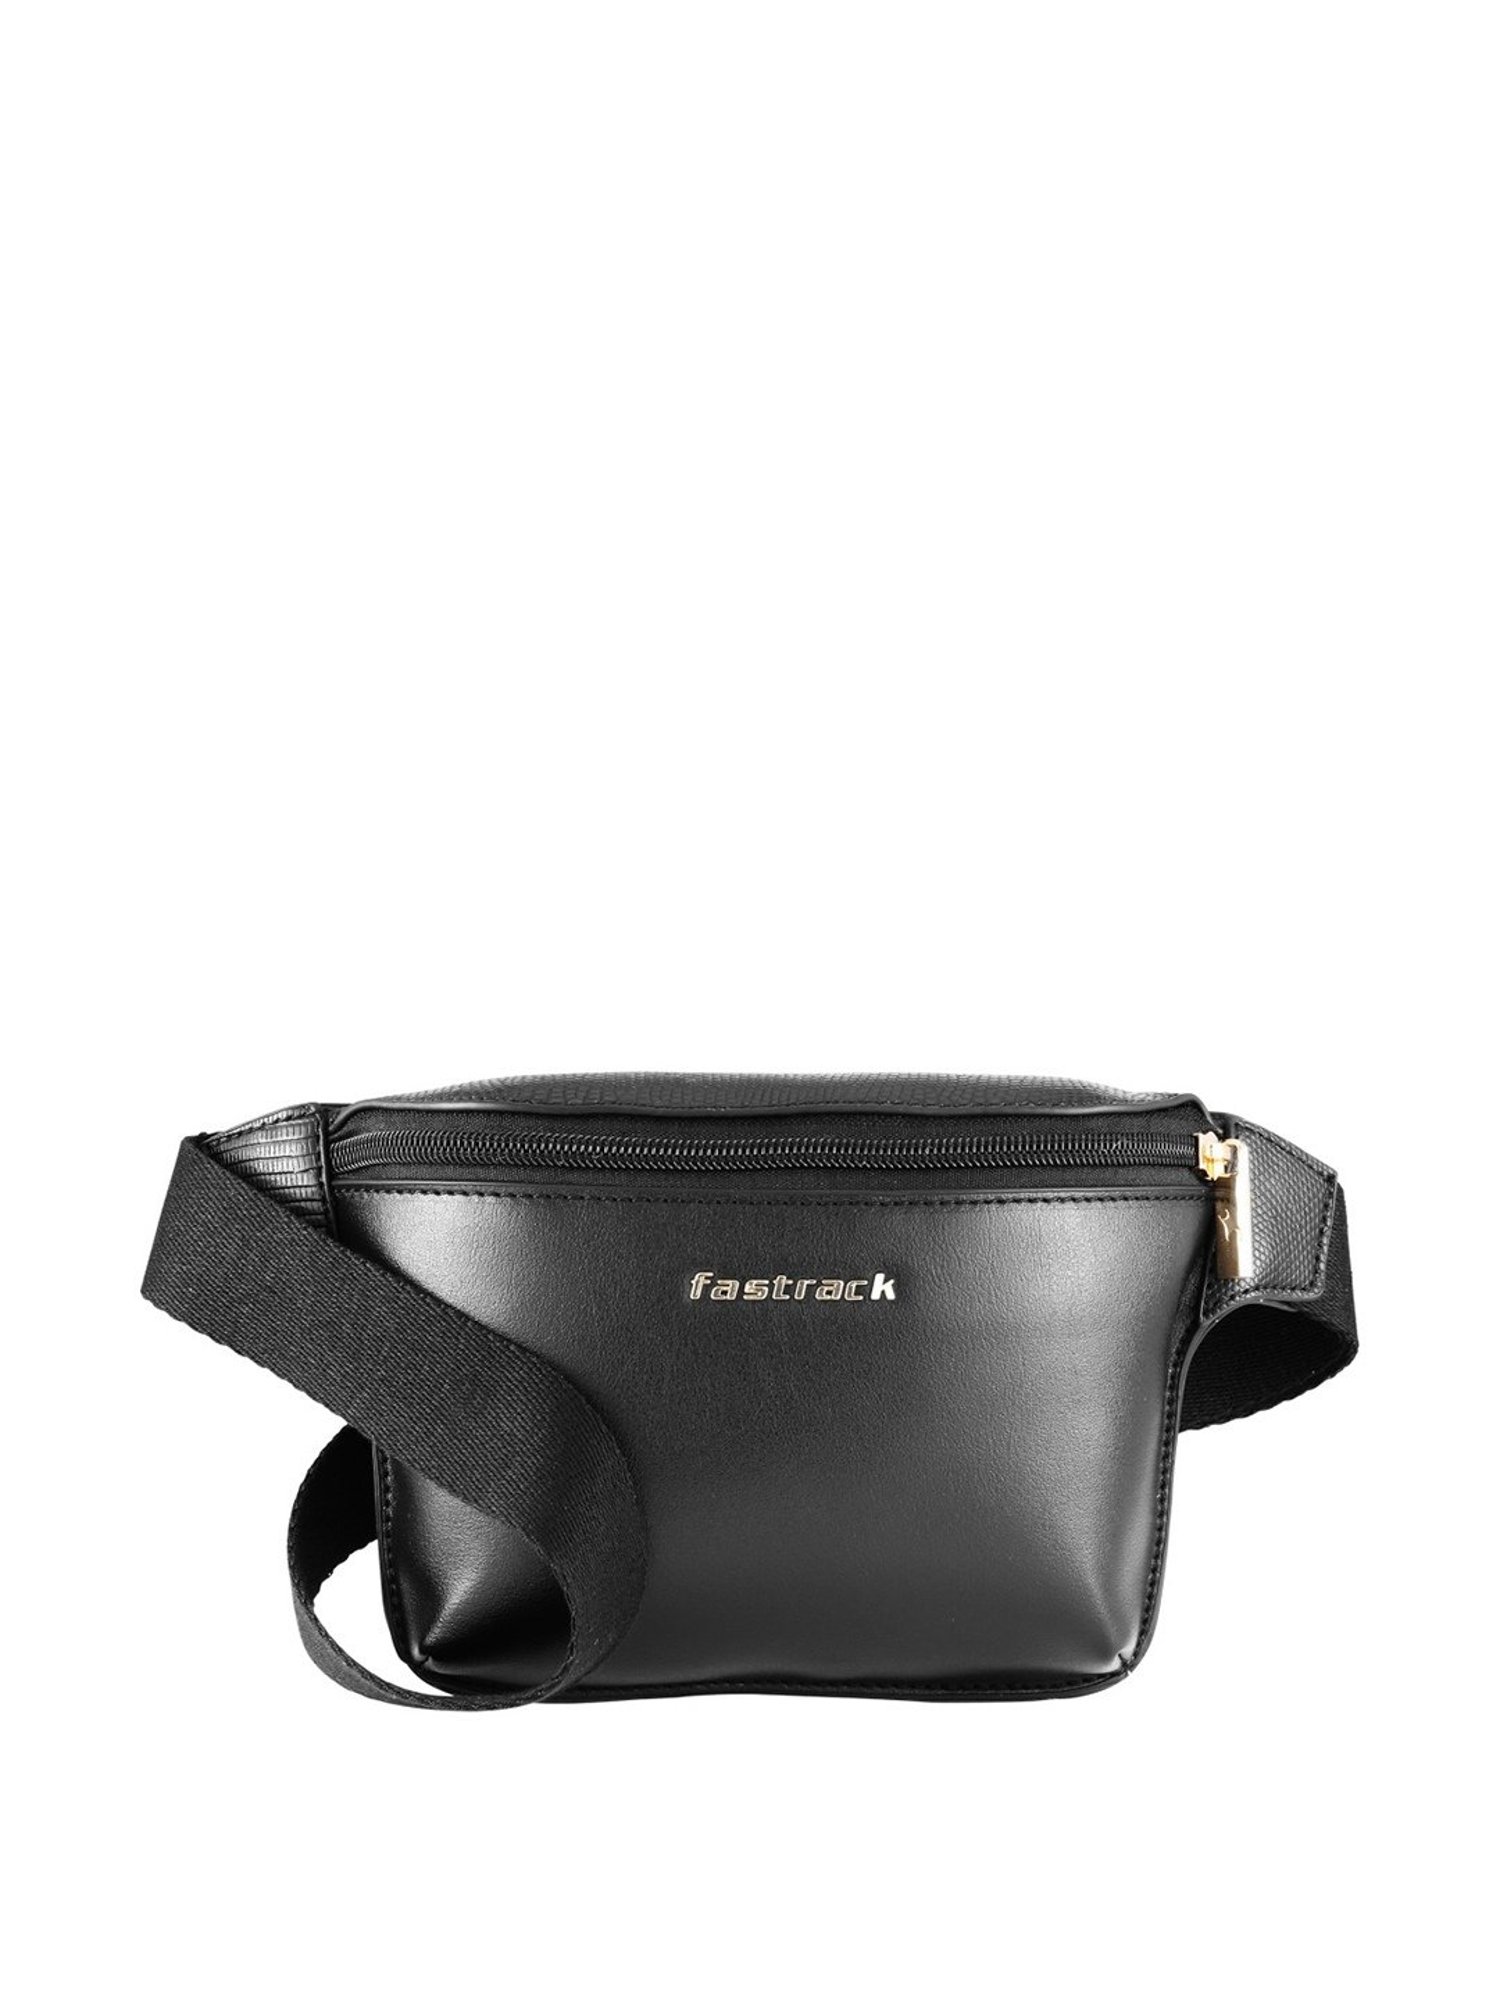 fastrack Black Pu Shoulder Bag in Bhopal at best price by Fast Track Store  - Justdial